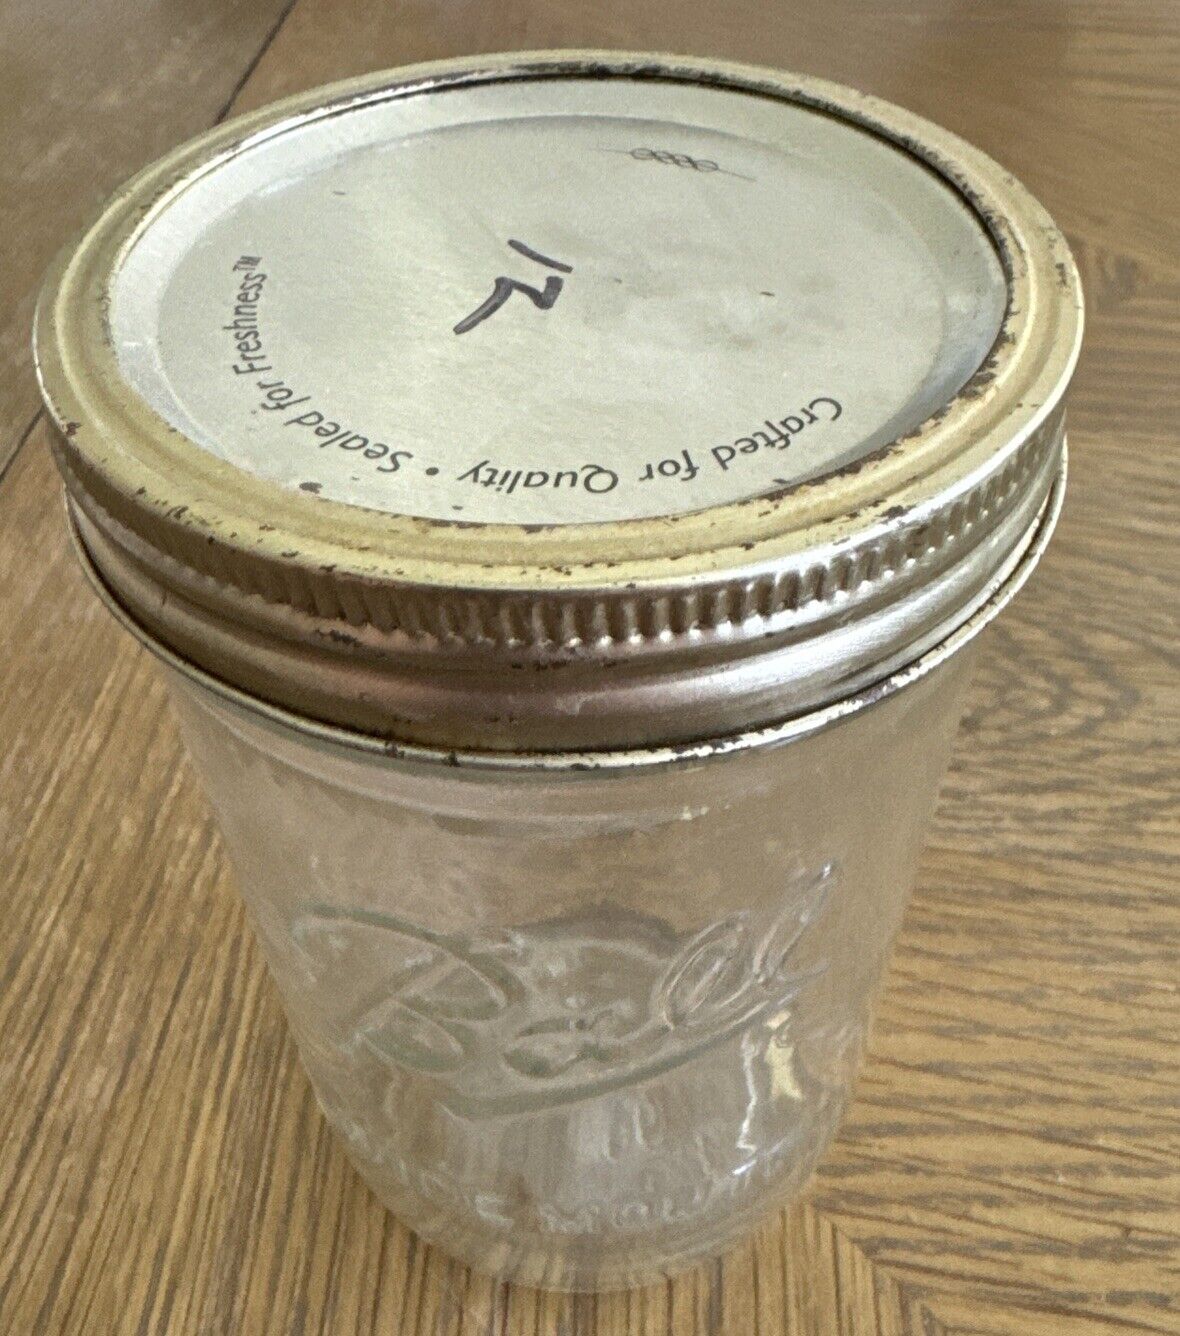 Vintage Ball Jar Wide Mouth Pint 16 oz Mason Jar With Lid Good Condition W/Fruit